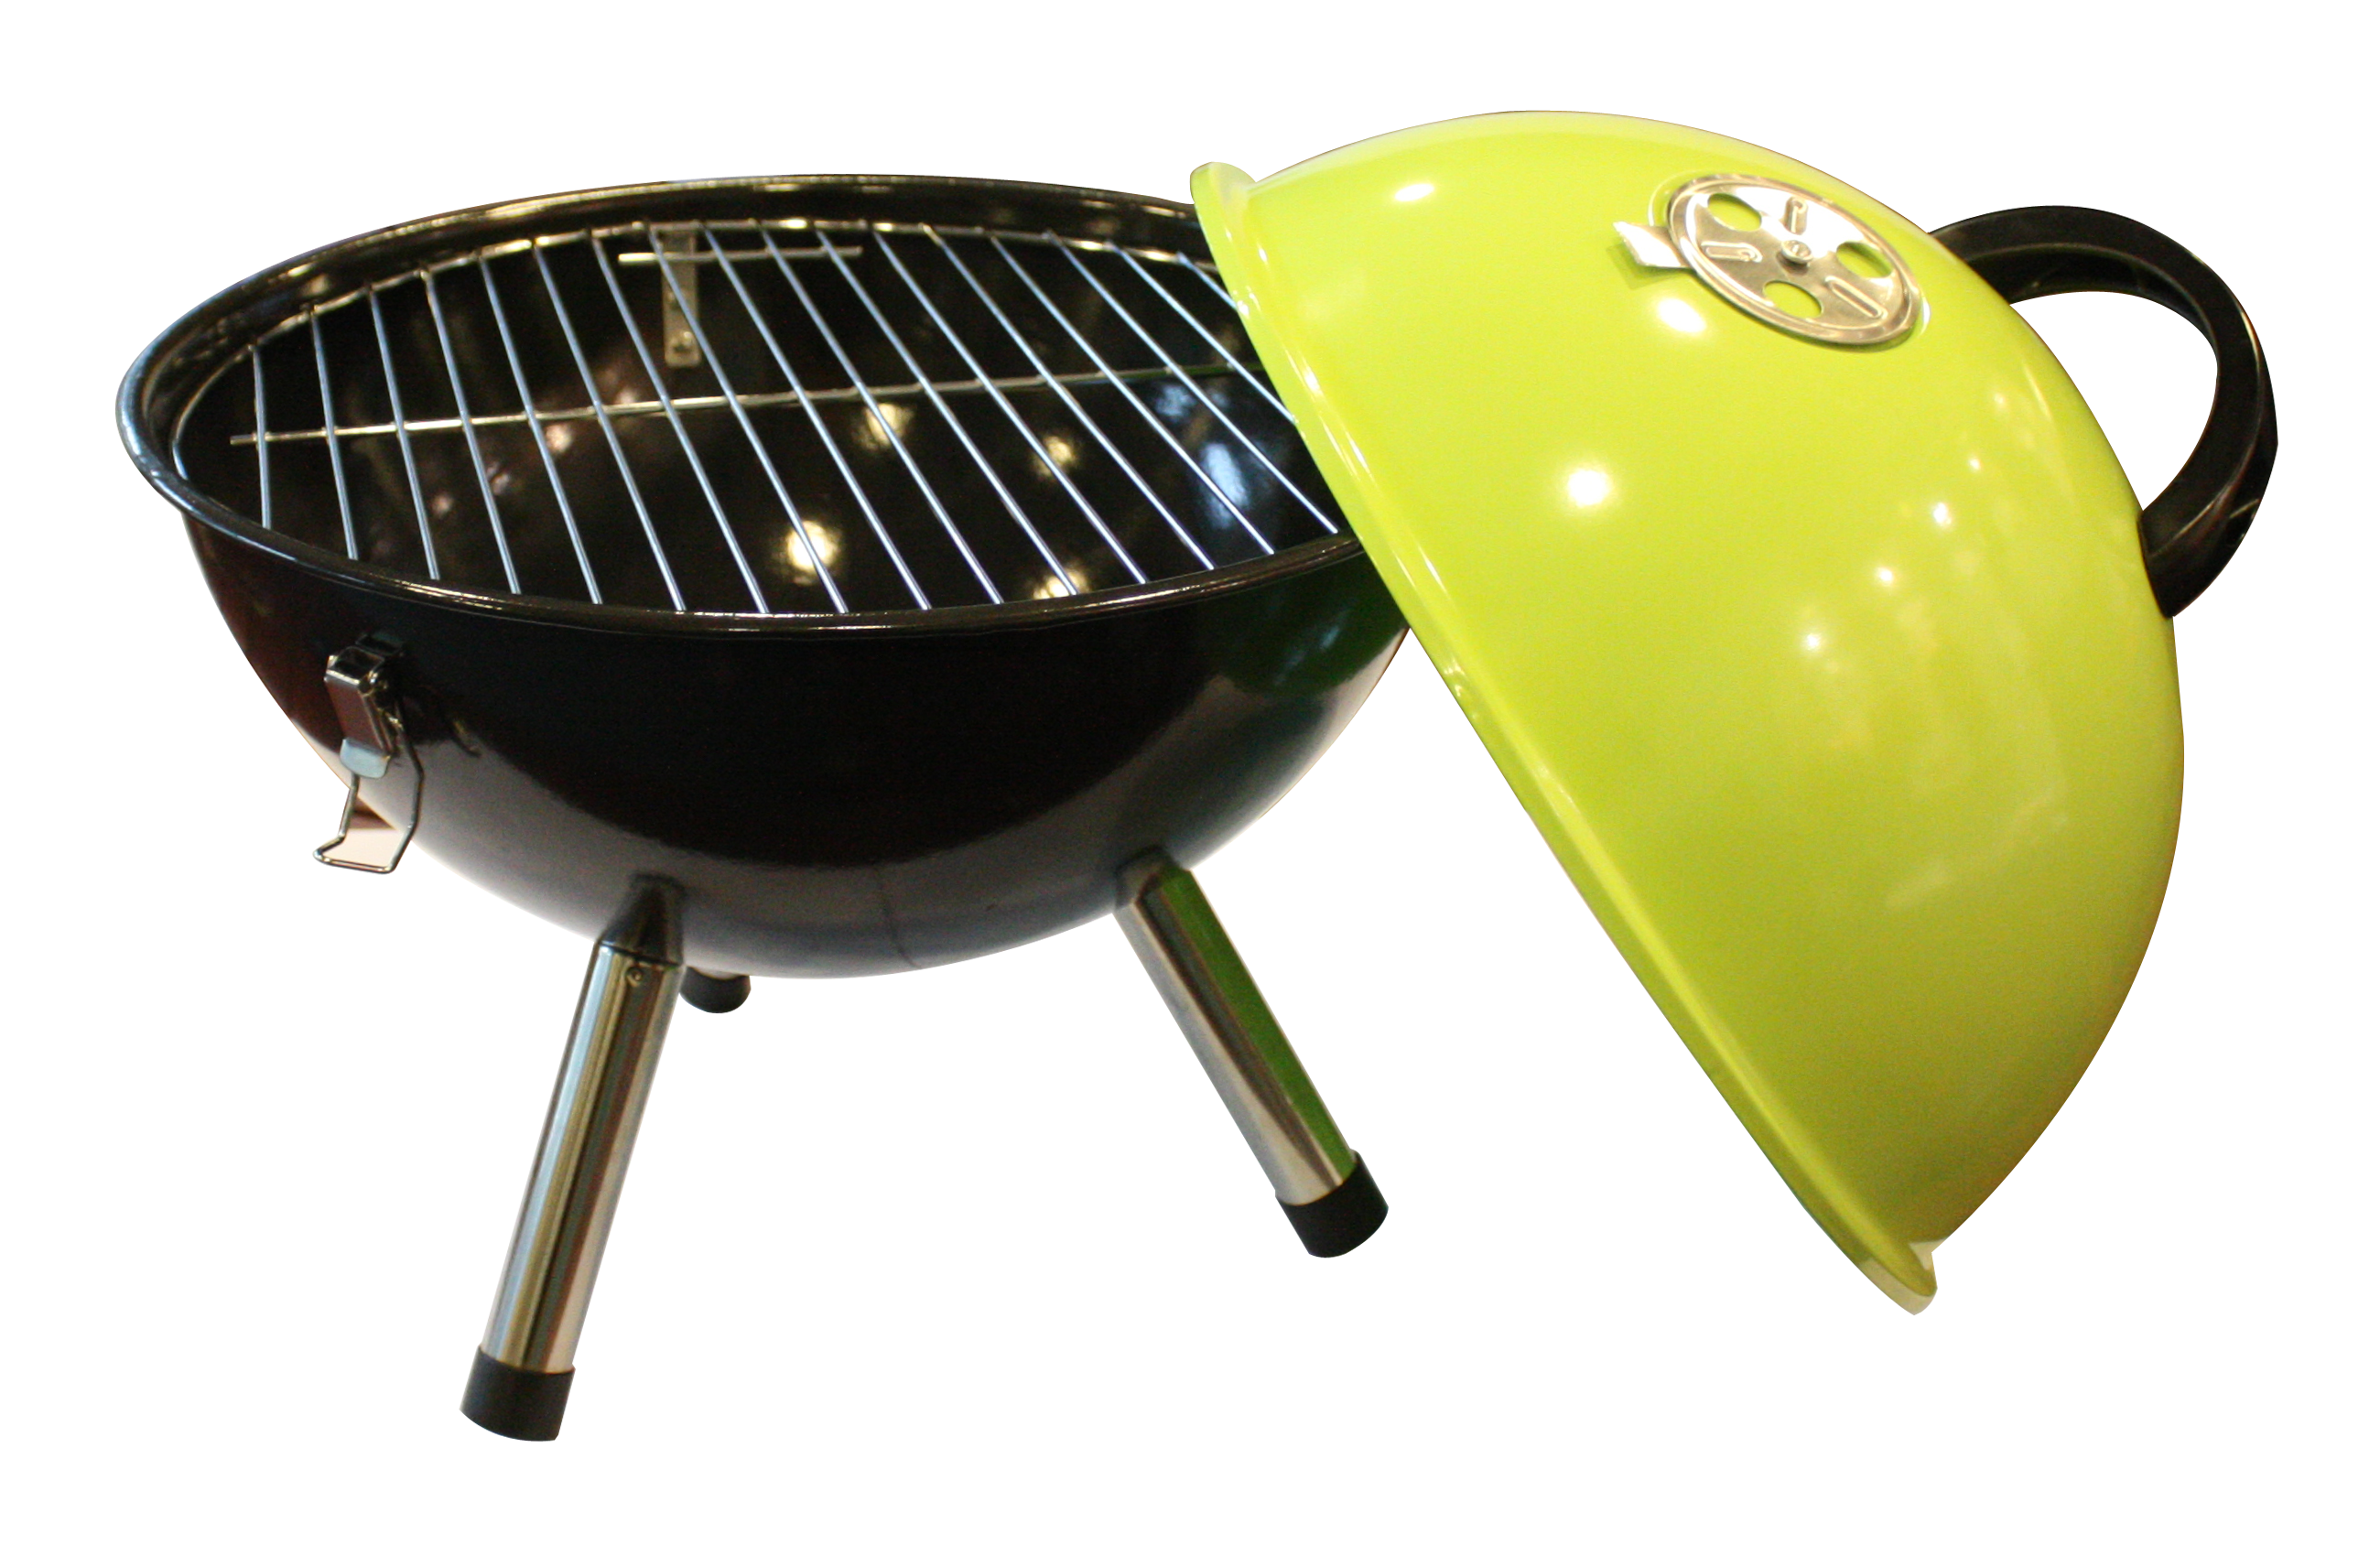 A Black And Yellow Barbecue Grill